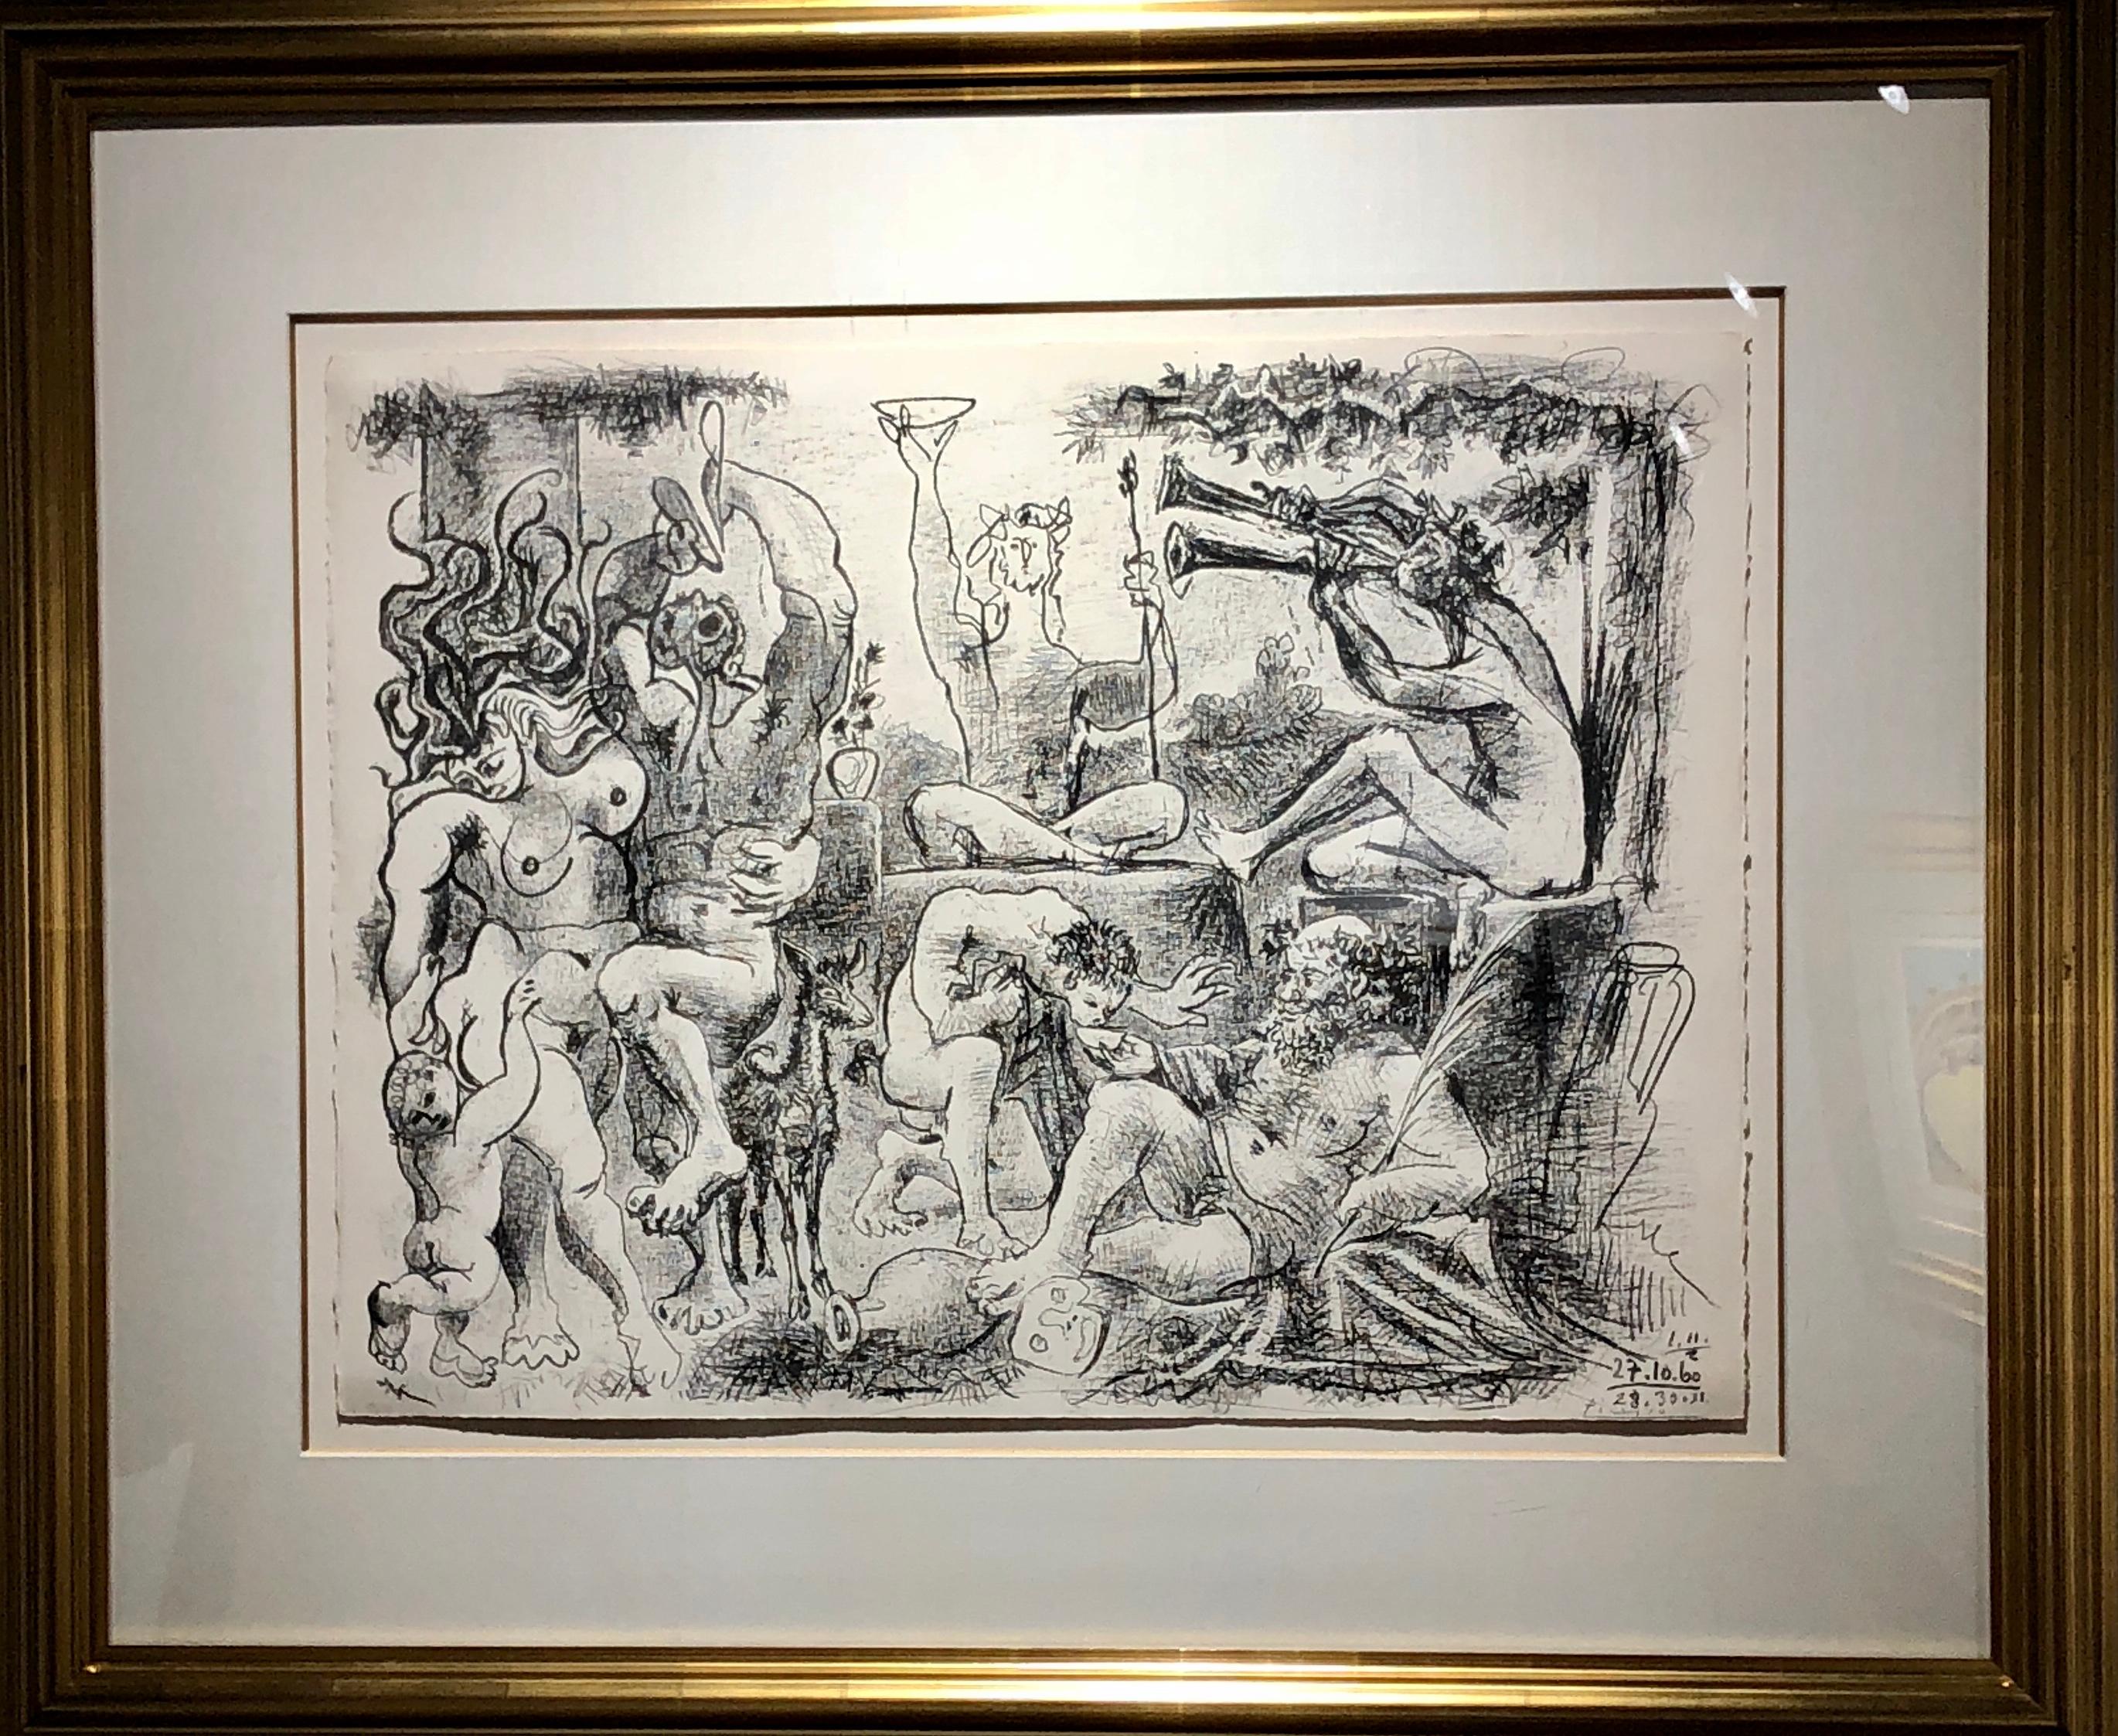 This piece is an original lithograph created by Pablo Picasso in 1960. It is an elaborate composition in crayon, pen and scrapings on transfer paper transferred to stone.  Picasso took up this work six different times, as can be seen on the right